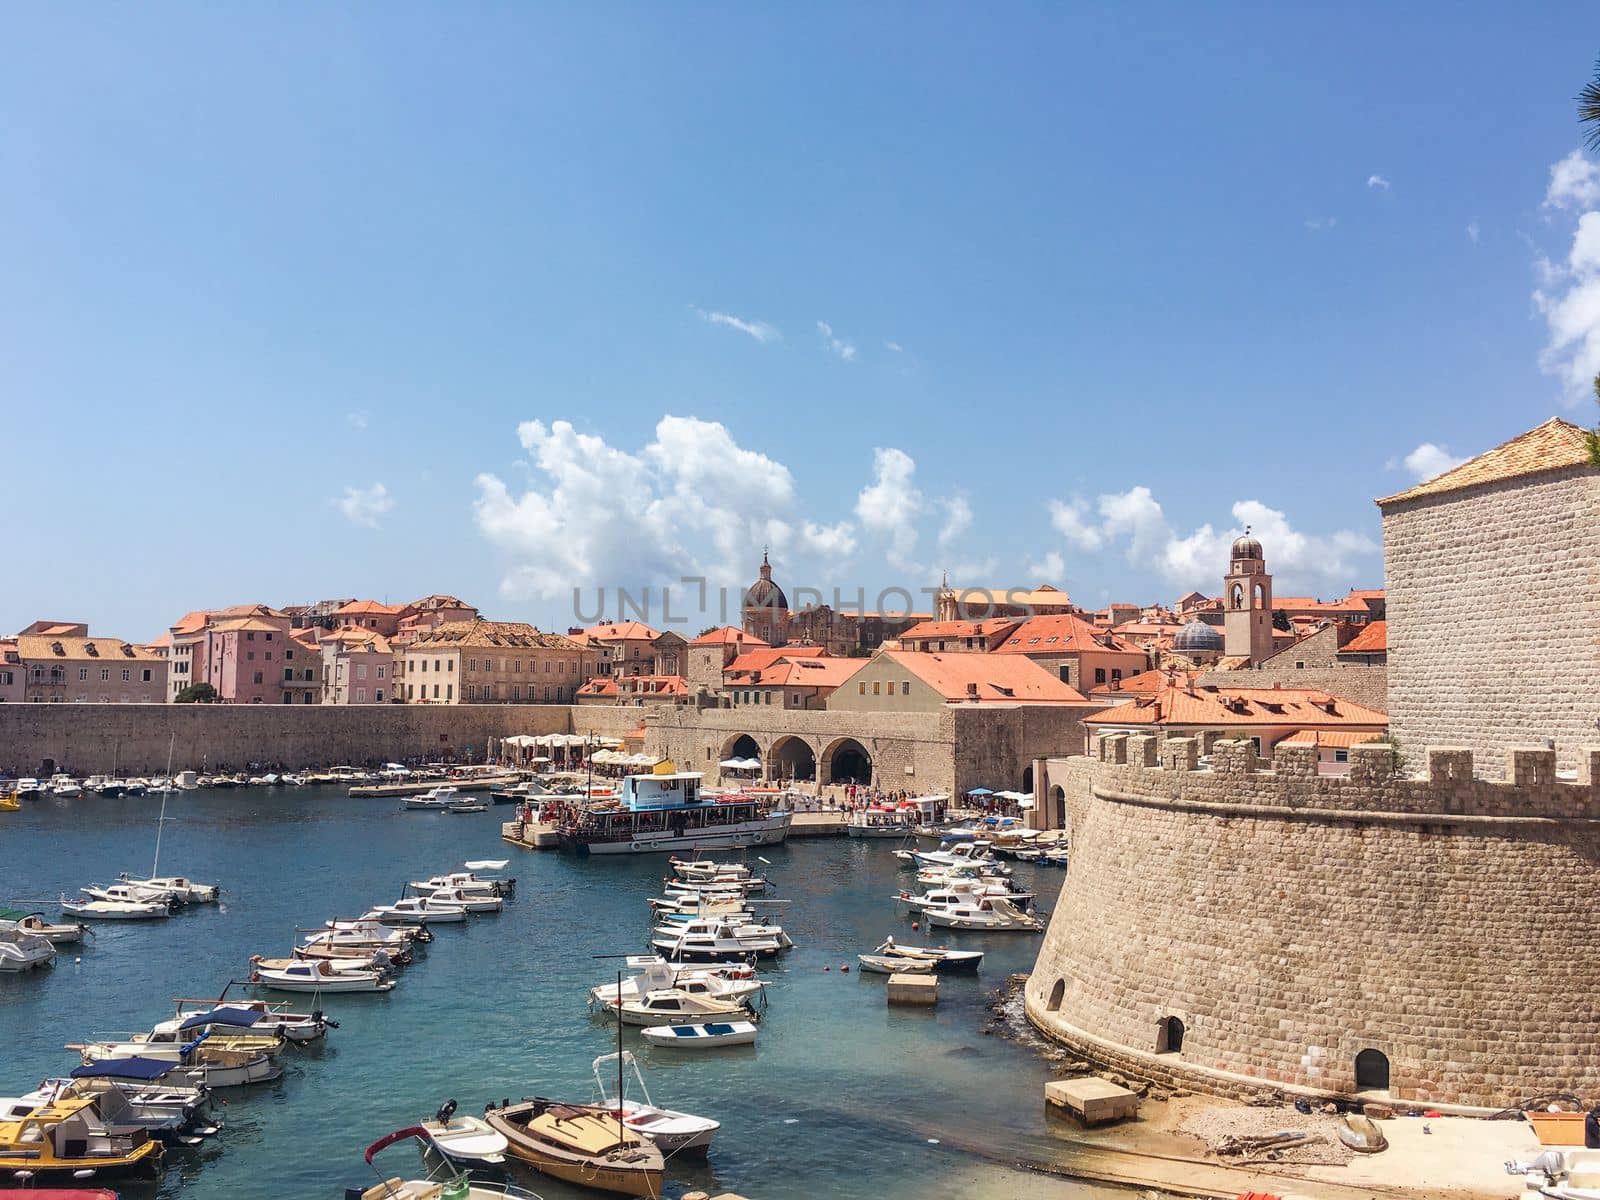 Views over the city of Dubrovnik Croatia in a european summer in game of thrones territory. High quality photo